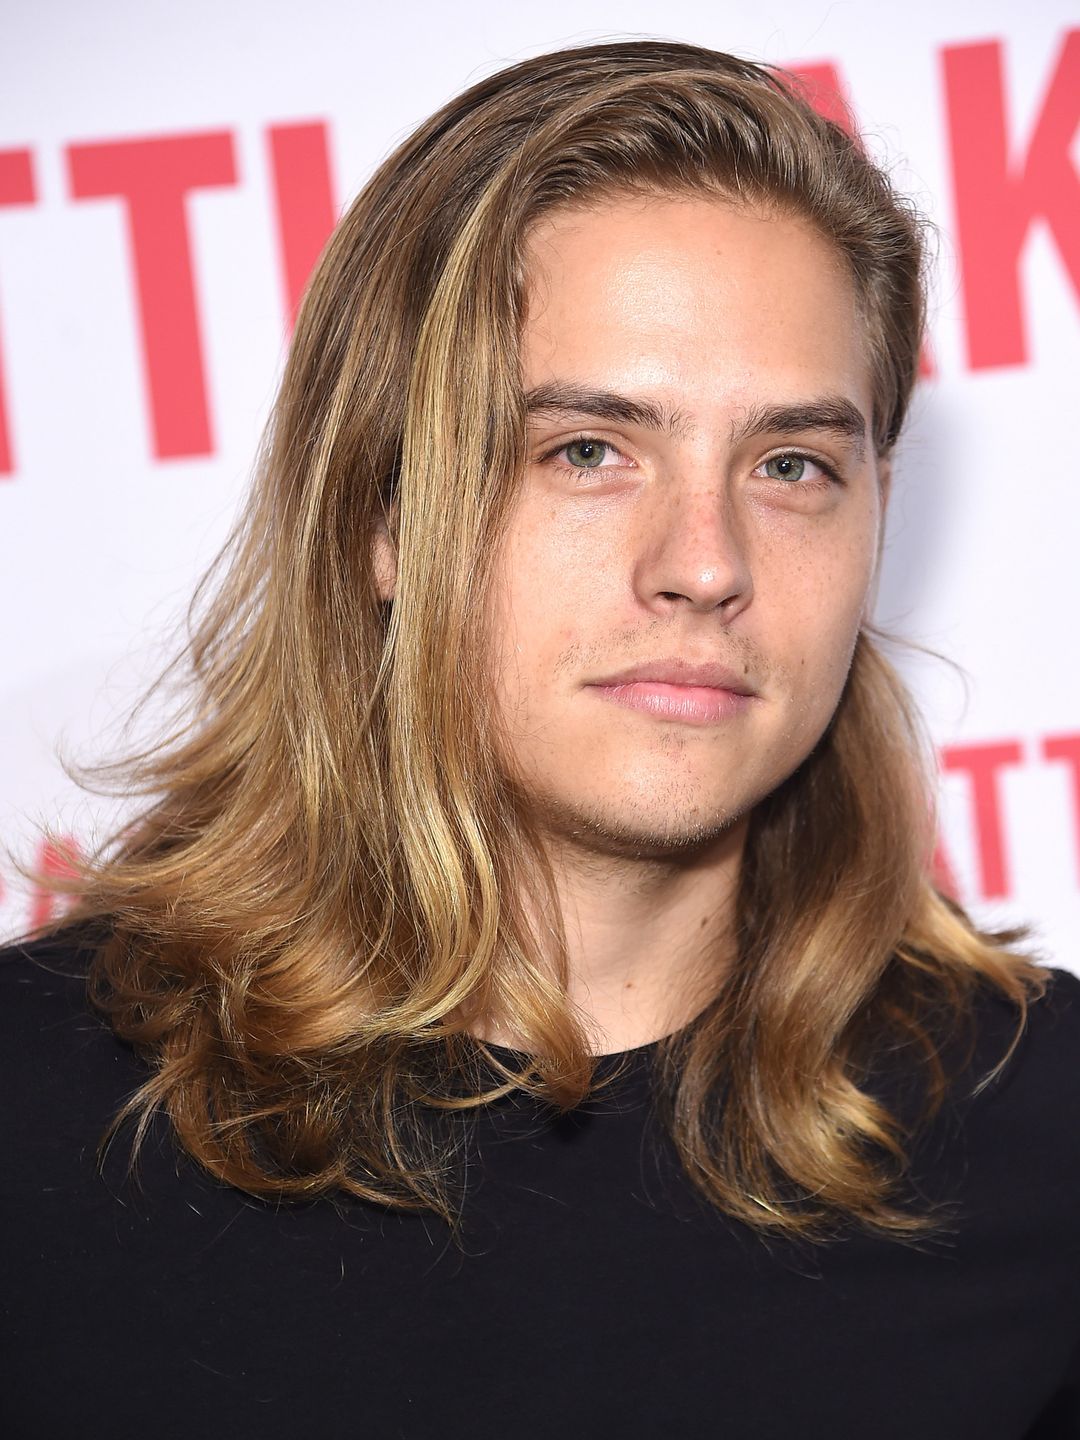 Dylan Sprouse his zodiac sign